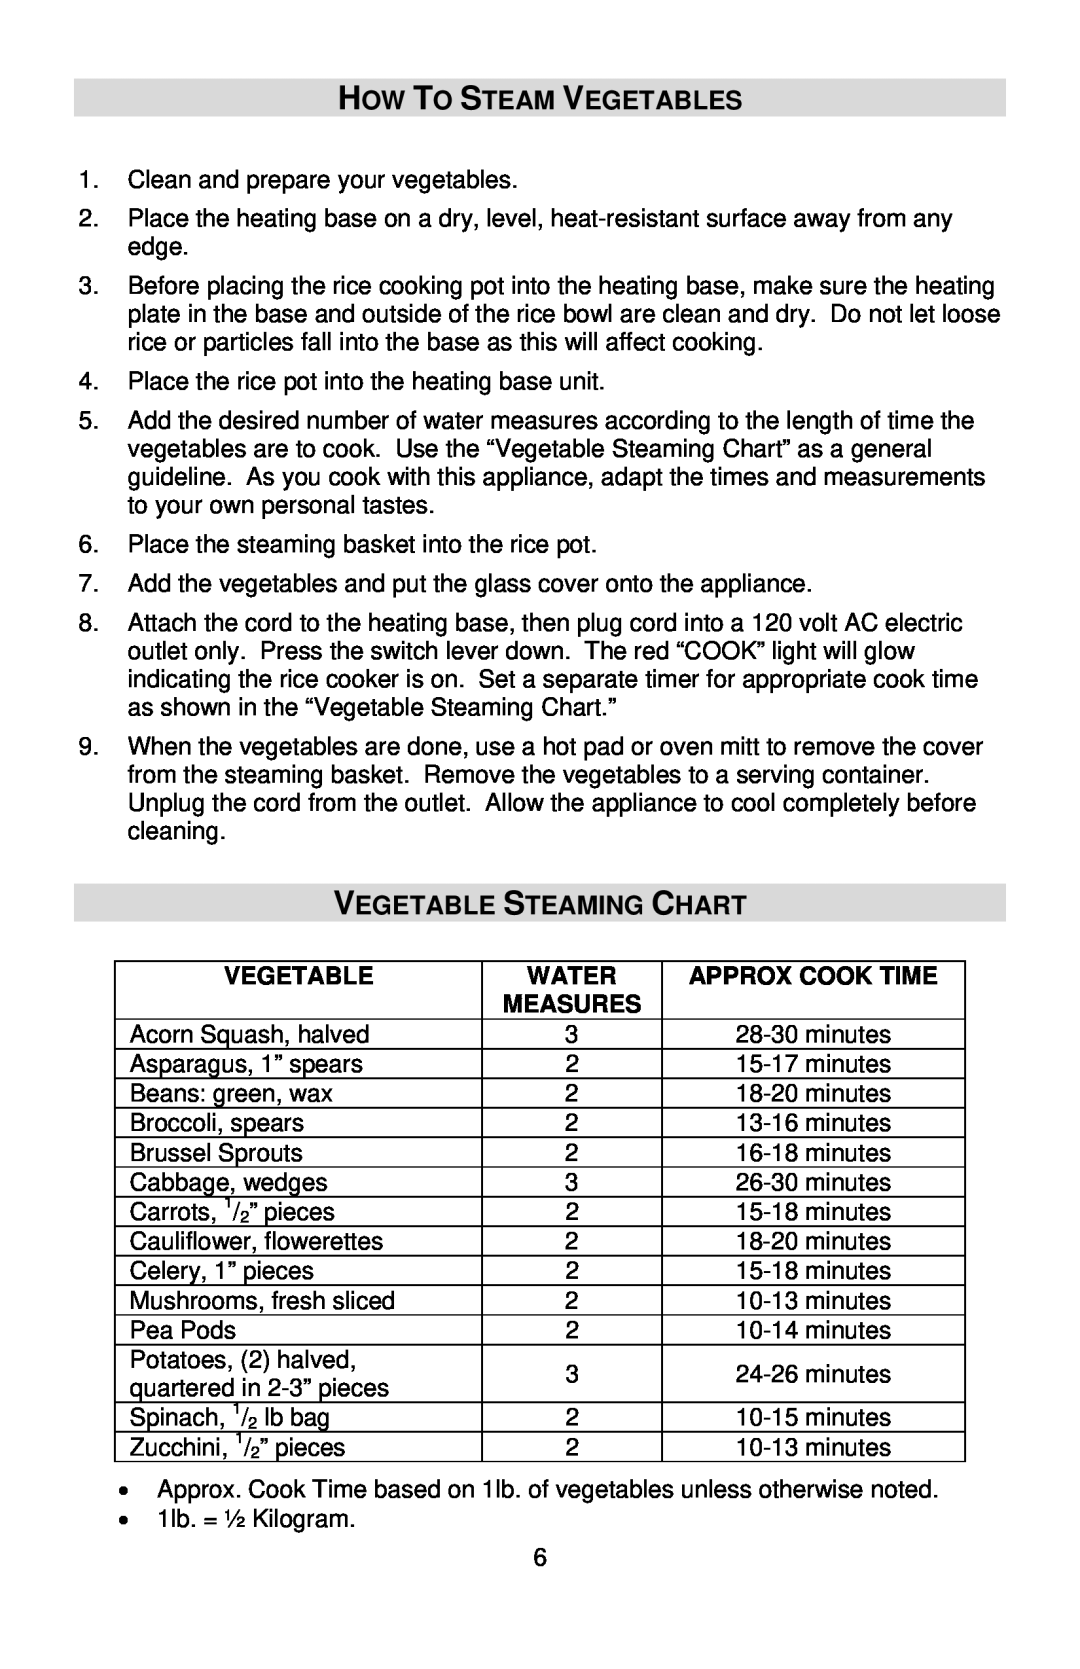 West Bend L5551E instruction manual How To Steam Vegetables, Vegetable Steaming Chart, Approx Cook Time, Measures, Water 